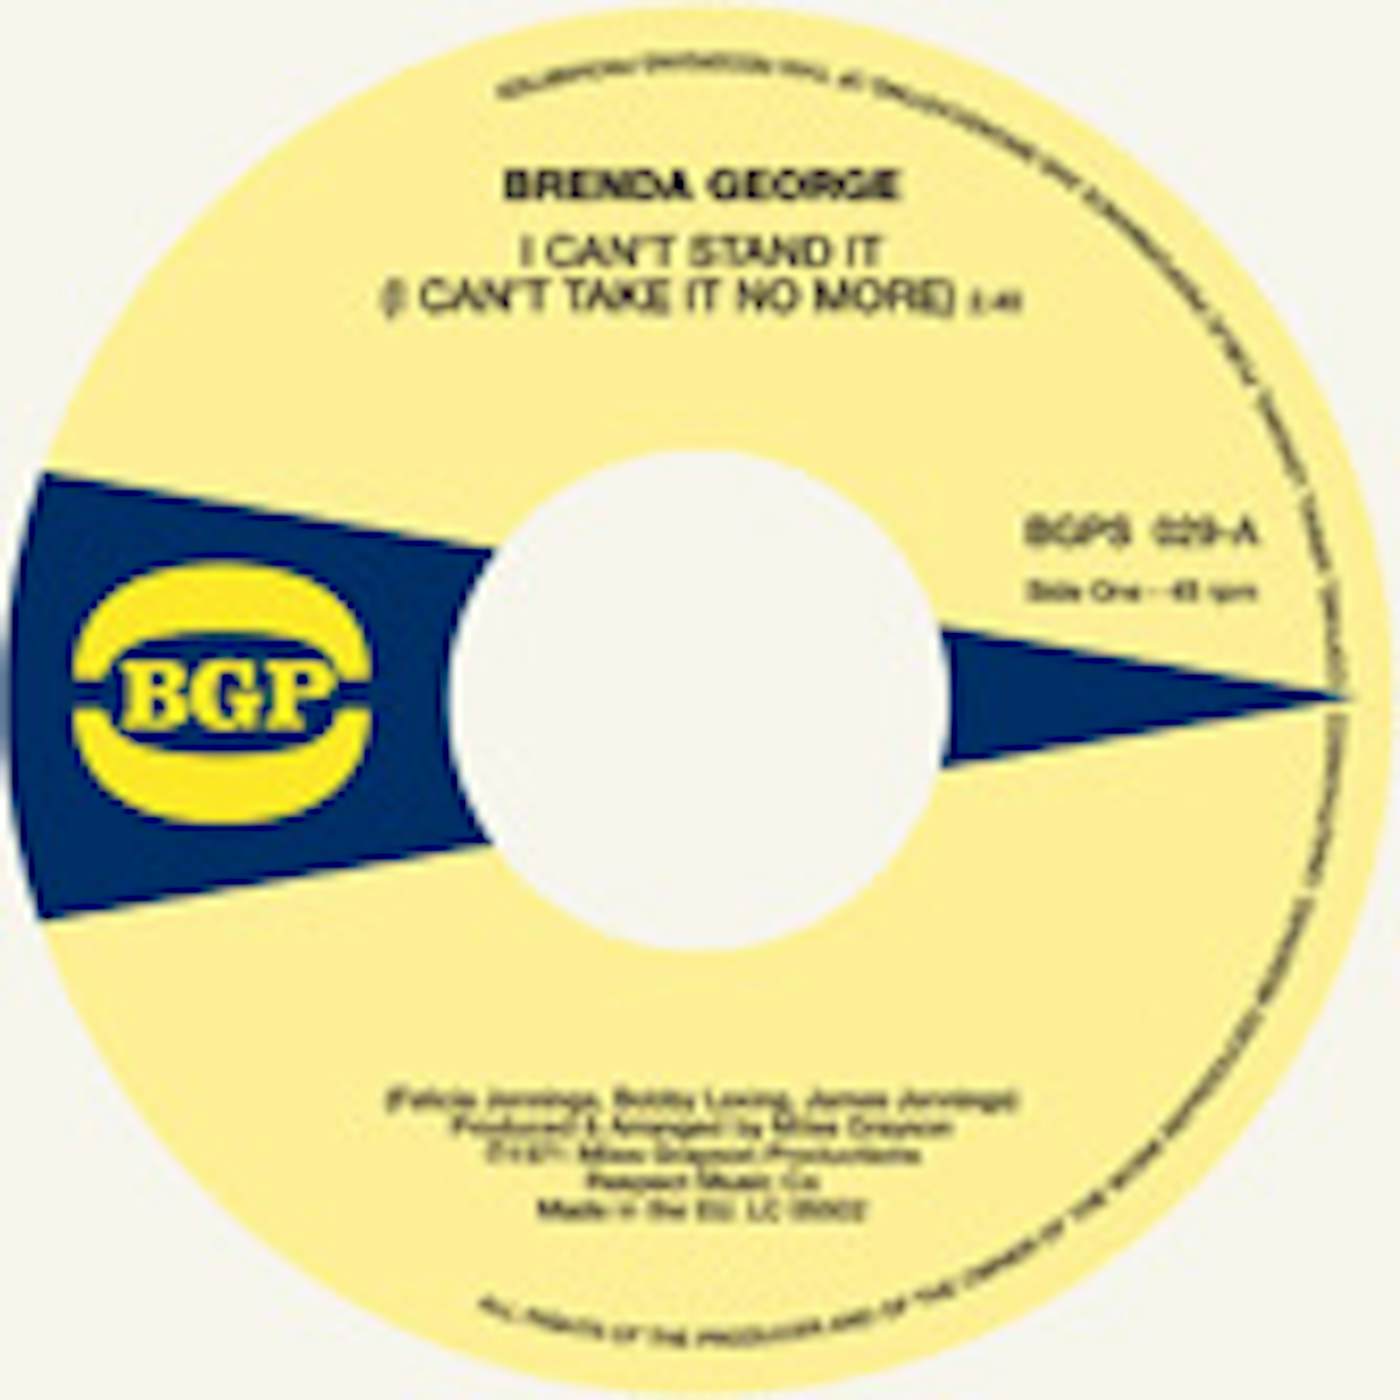 Brenda George I CAN'T STAND IT / WHAT YOU SEE IS WHAT YOU'RE Vinyl Record